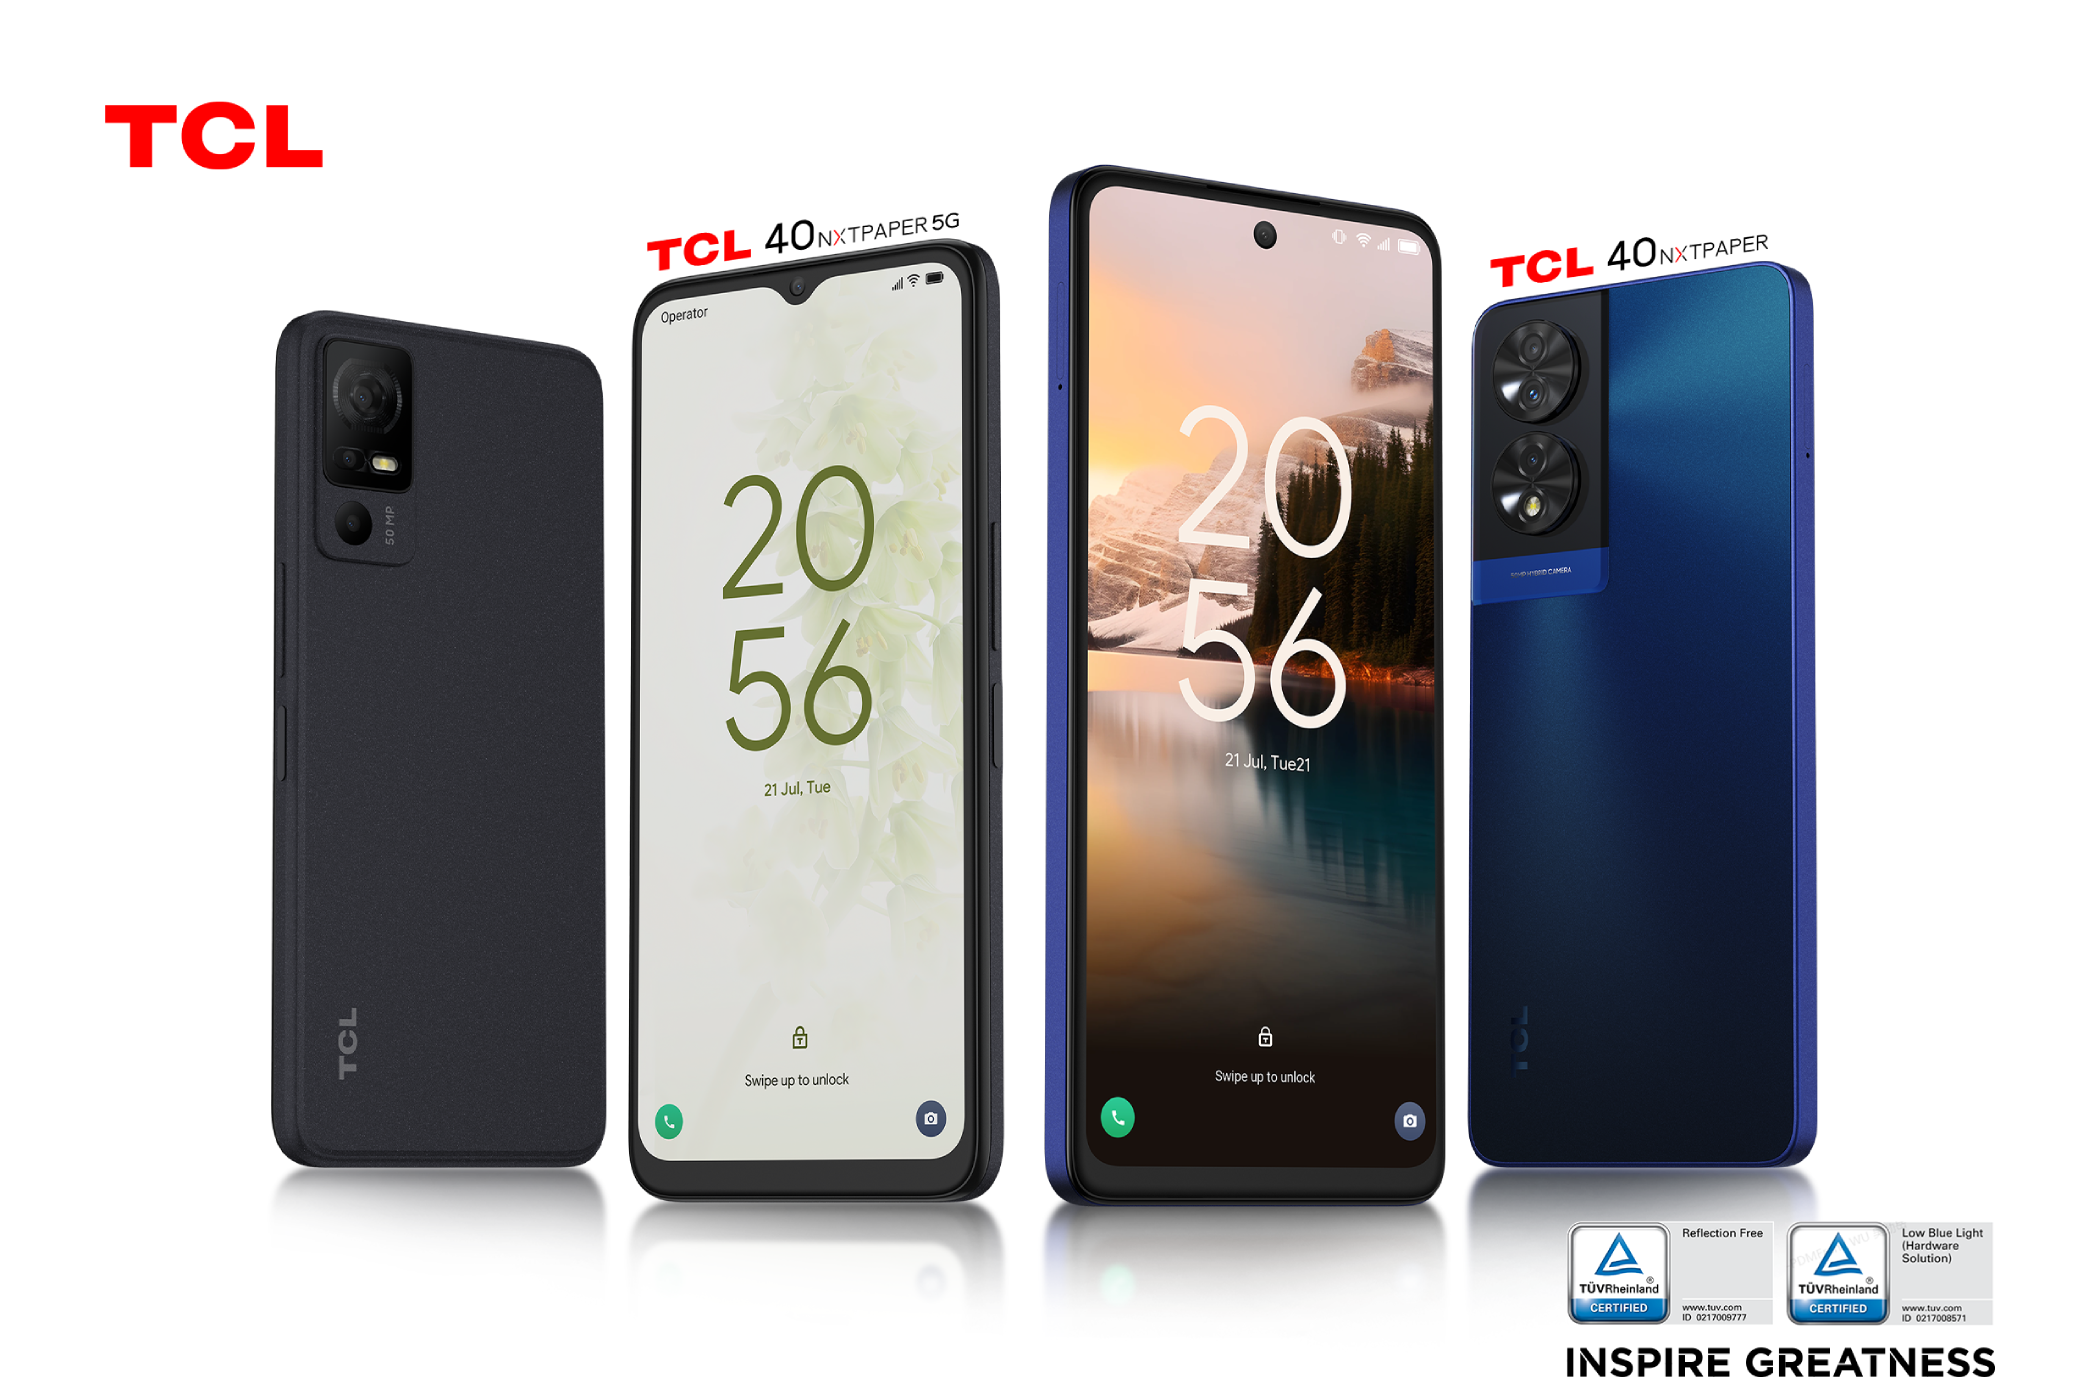 TCL brings its NXTPAPER display tech to its latest smartphones